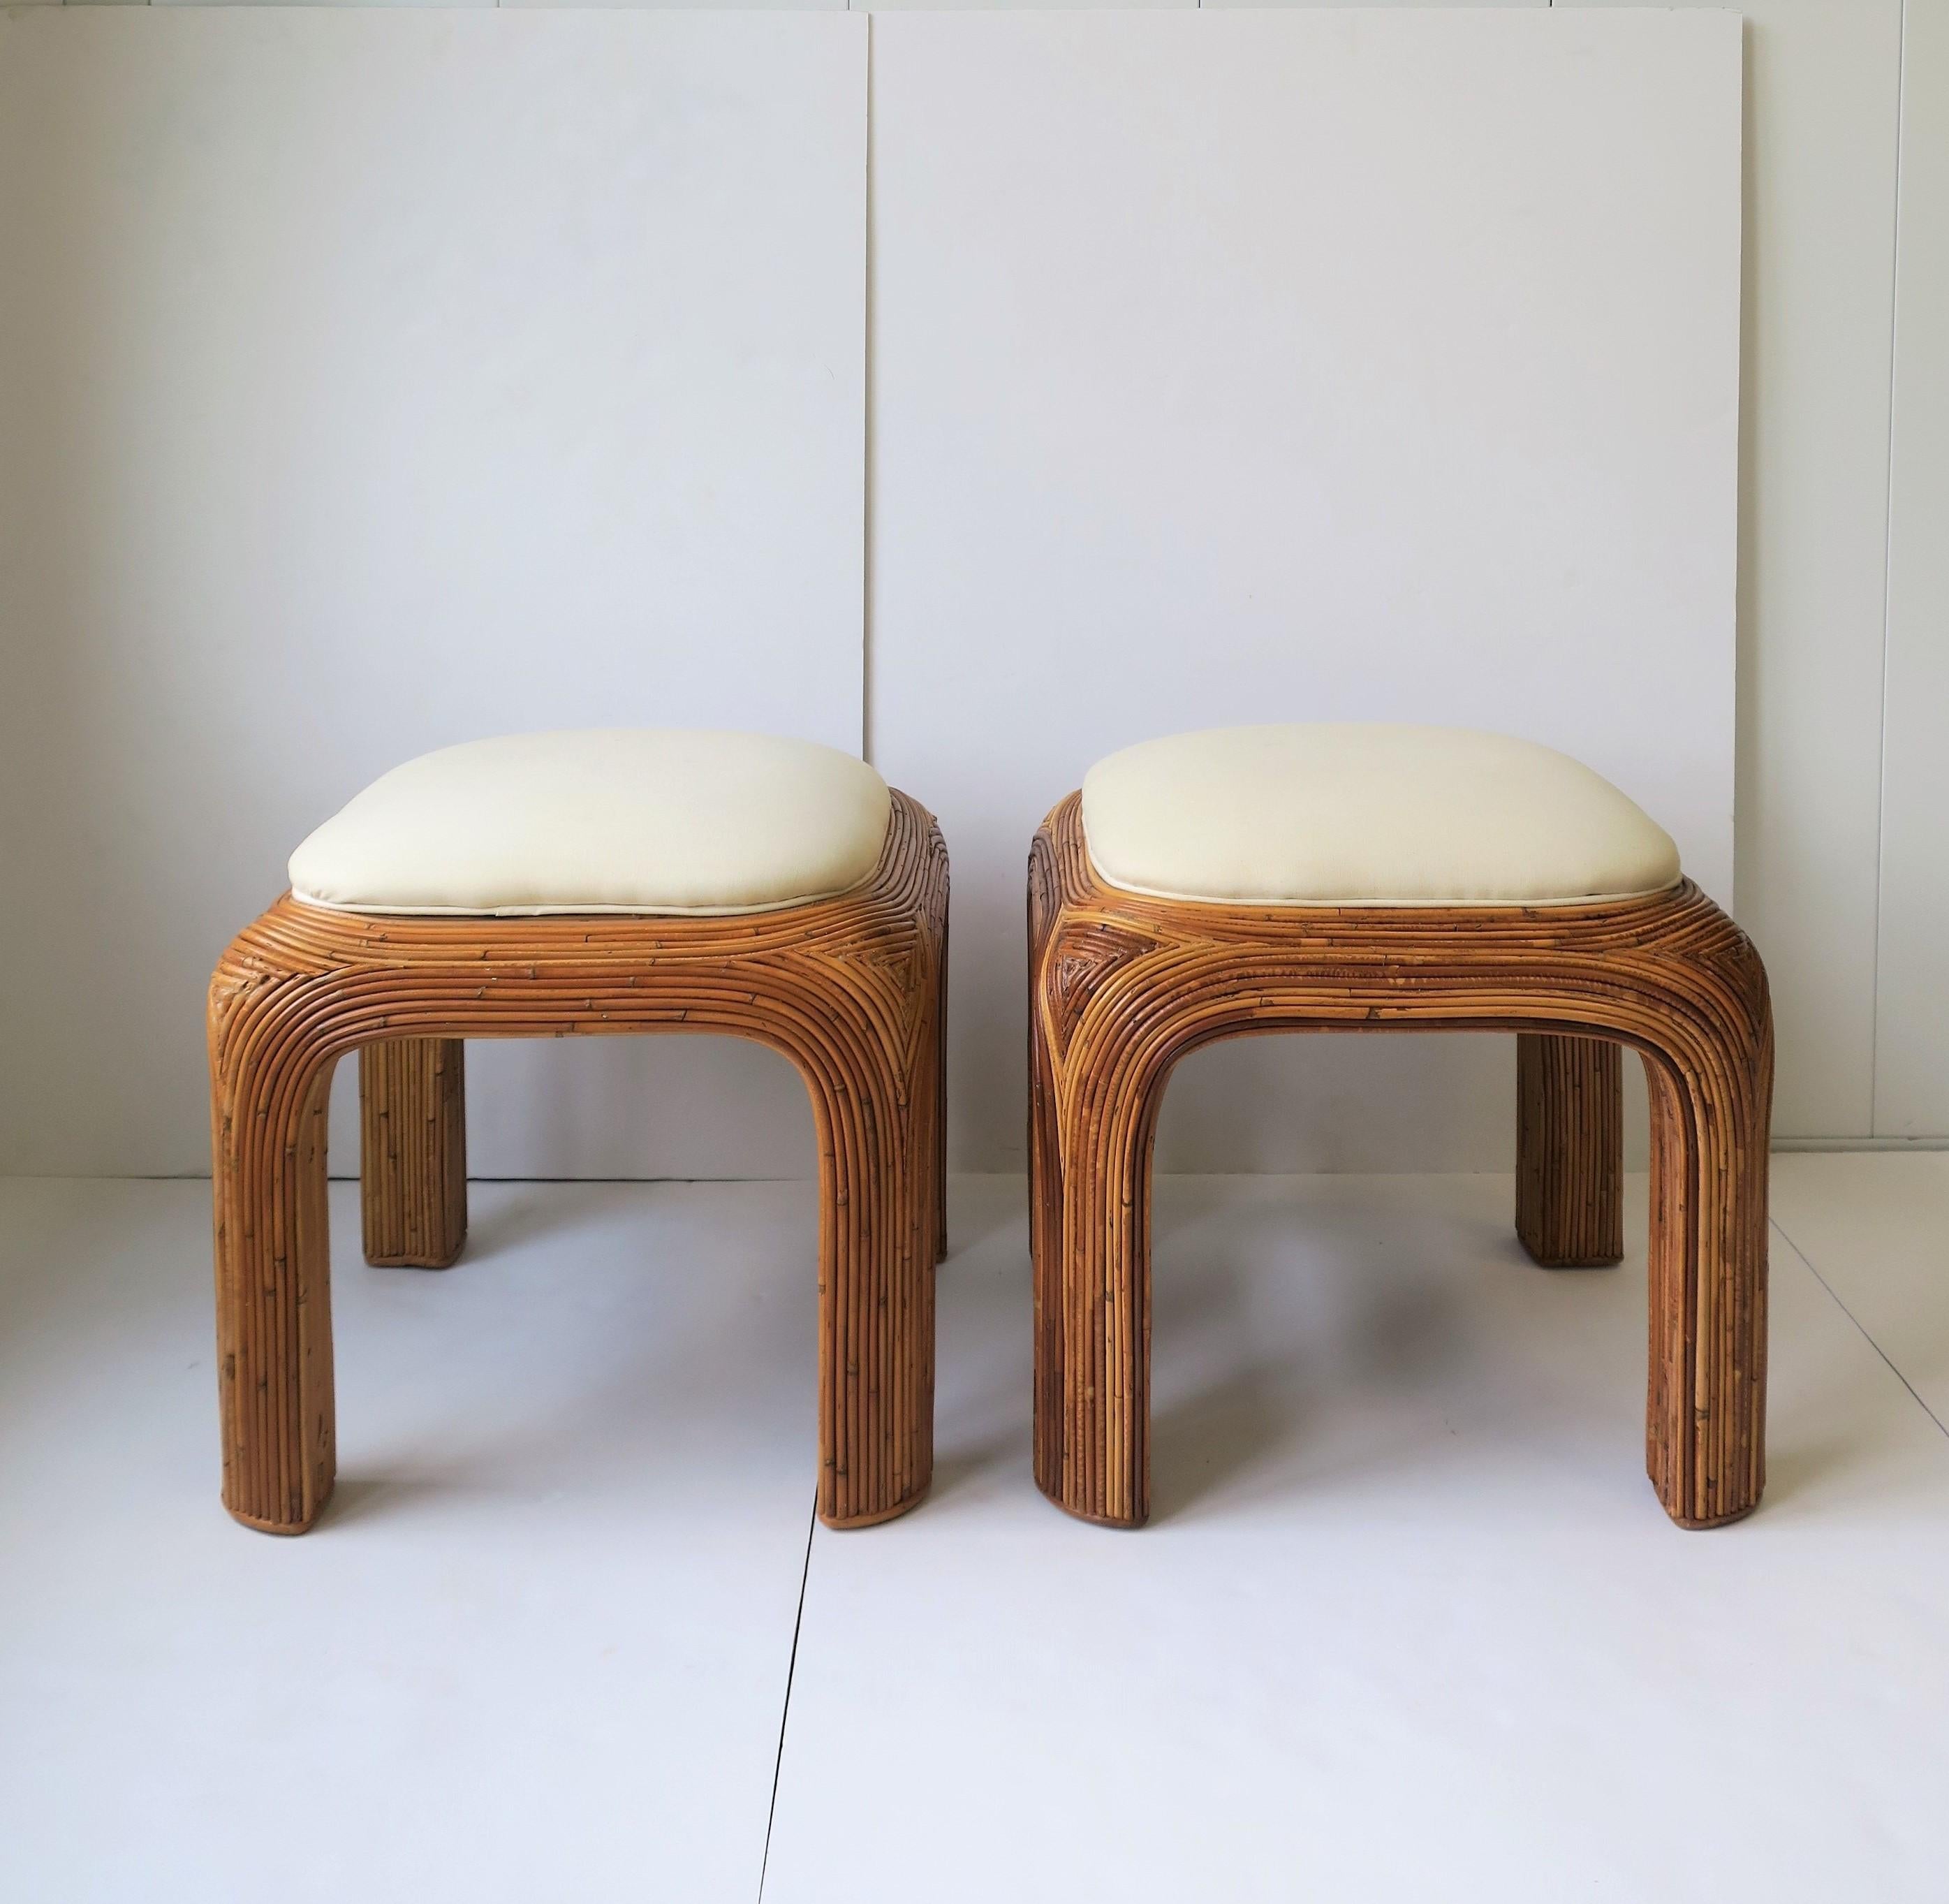 A pair of Modern style or Post Modern period wicker pencil reed upholstered stools or benches with cream/ off-white/ beige colored seats, in the style of Italian designer, Gabriella Crespi, circa late 1970s-1980s.

Measurements: 18